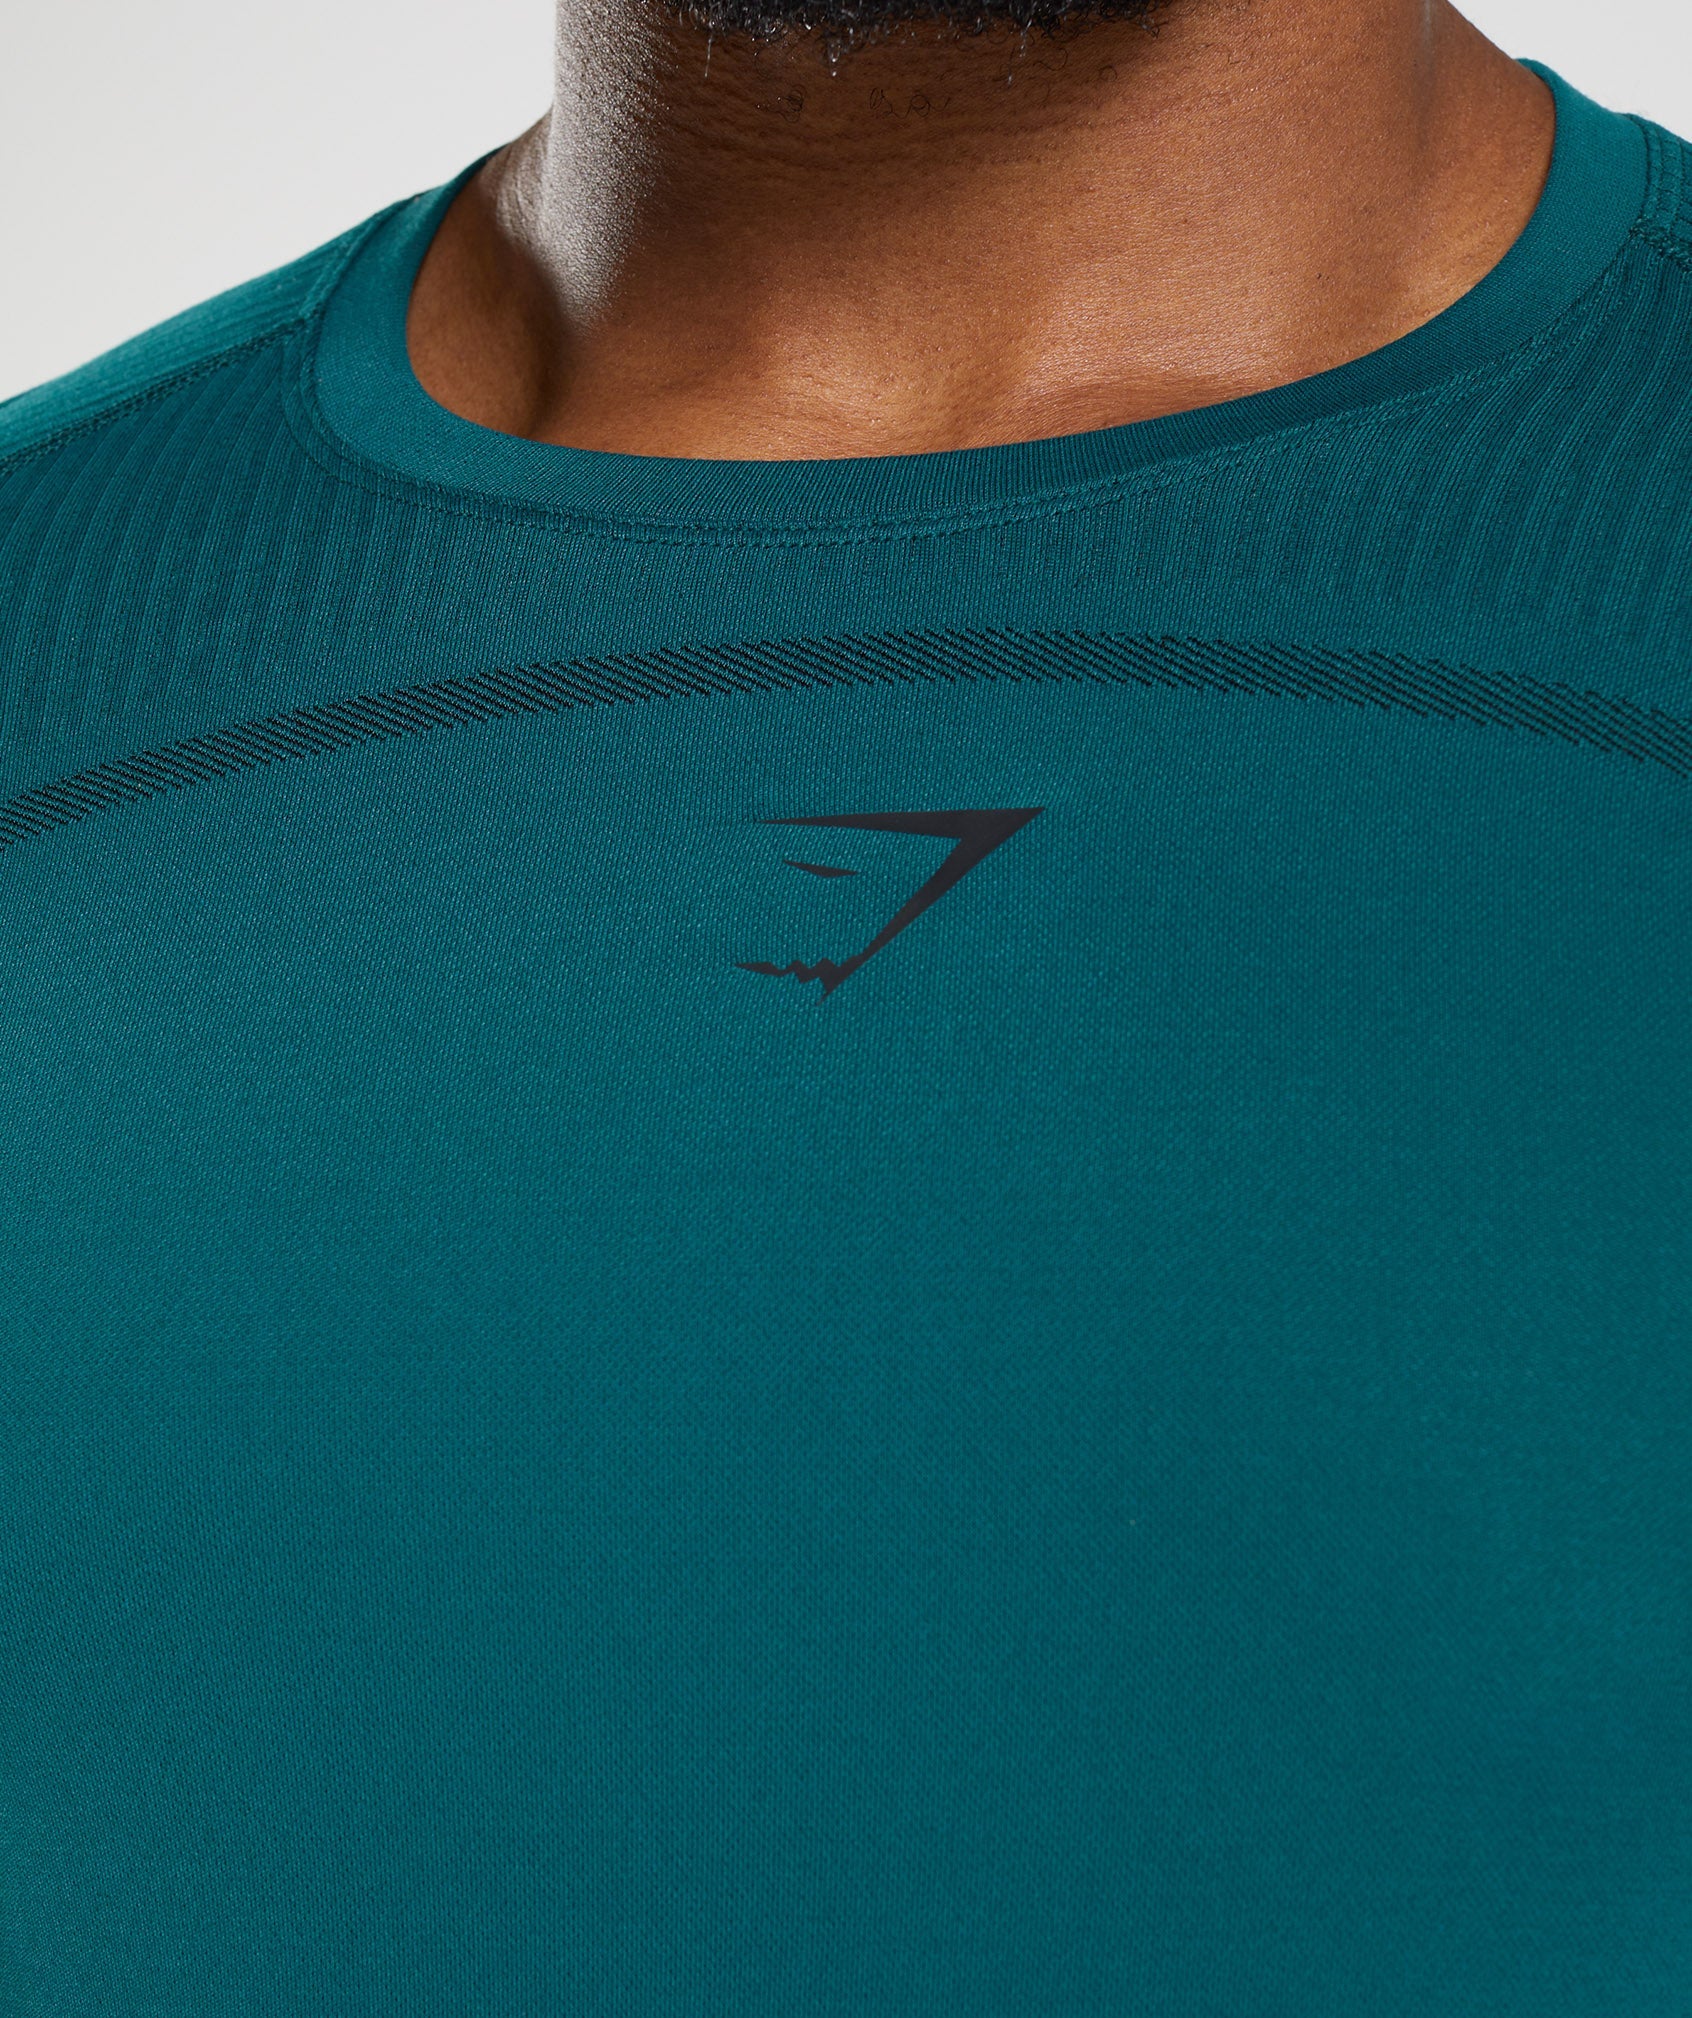 315 LS Seamless T-Shirt in Winter Teal/Black - view 5